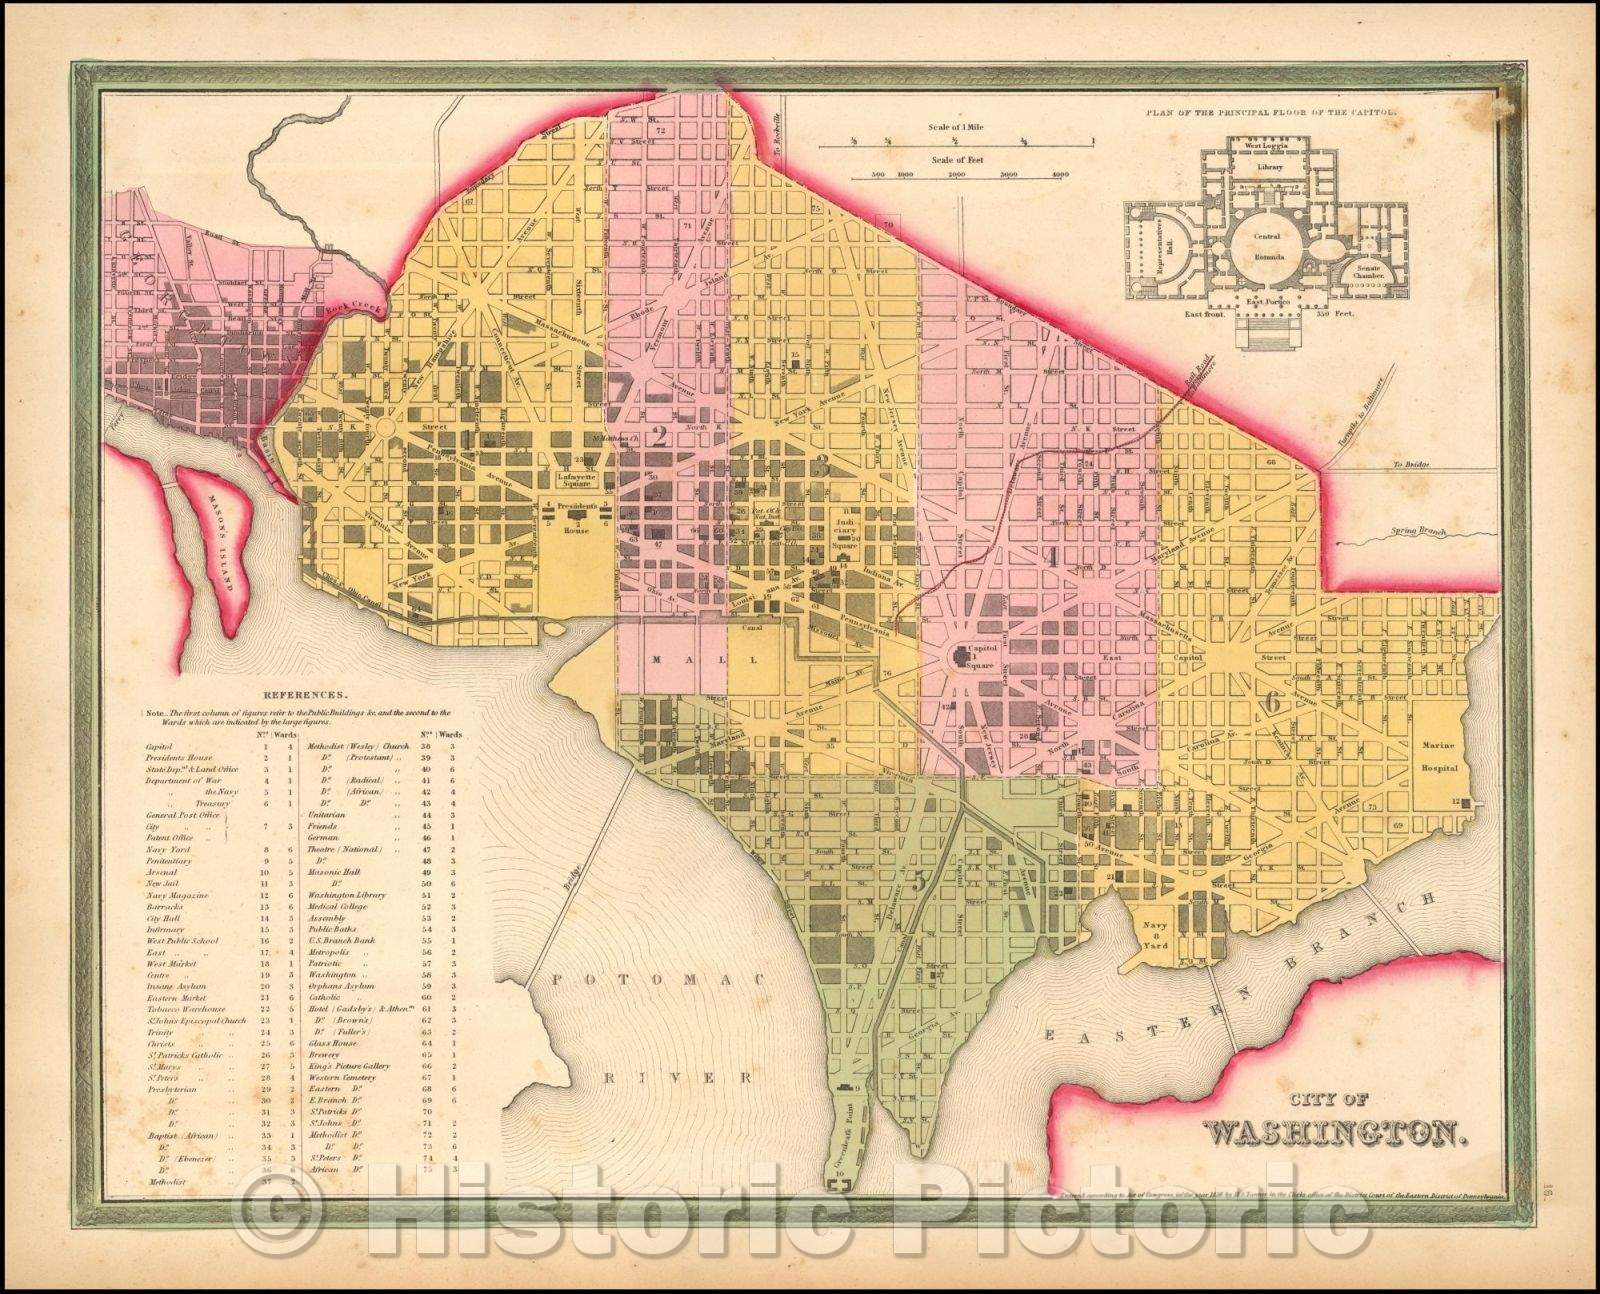 Historic Map - Plan of the City of Washington. The Capitol of the United States of America, 1836, Henry Schenk Tanner - Vintage Wall Art